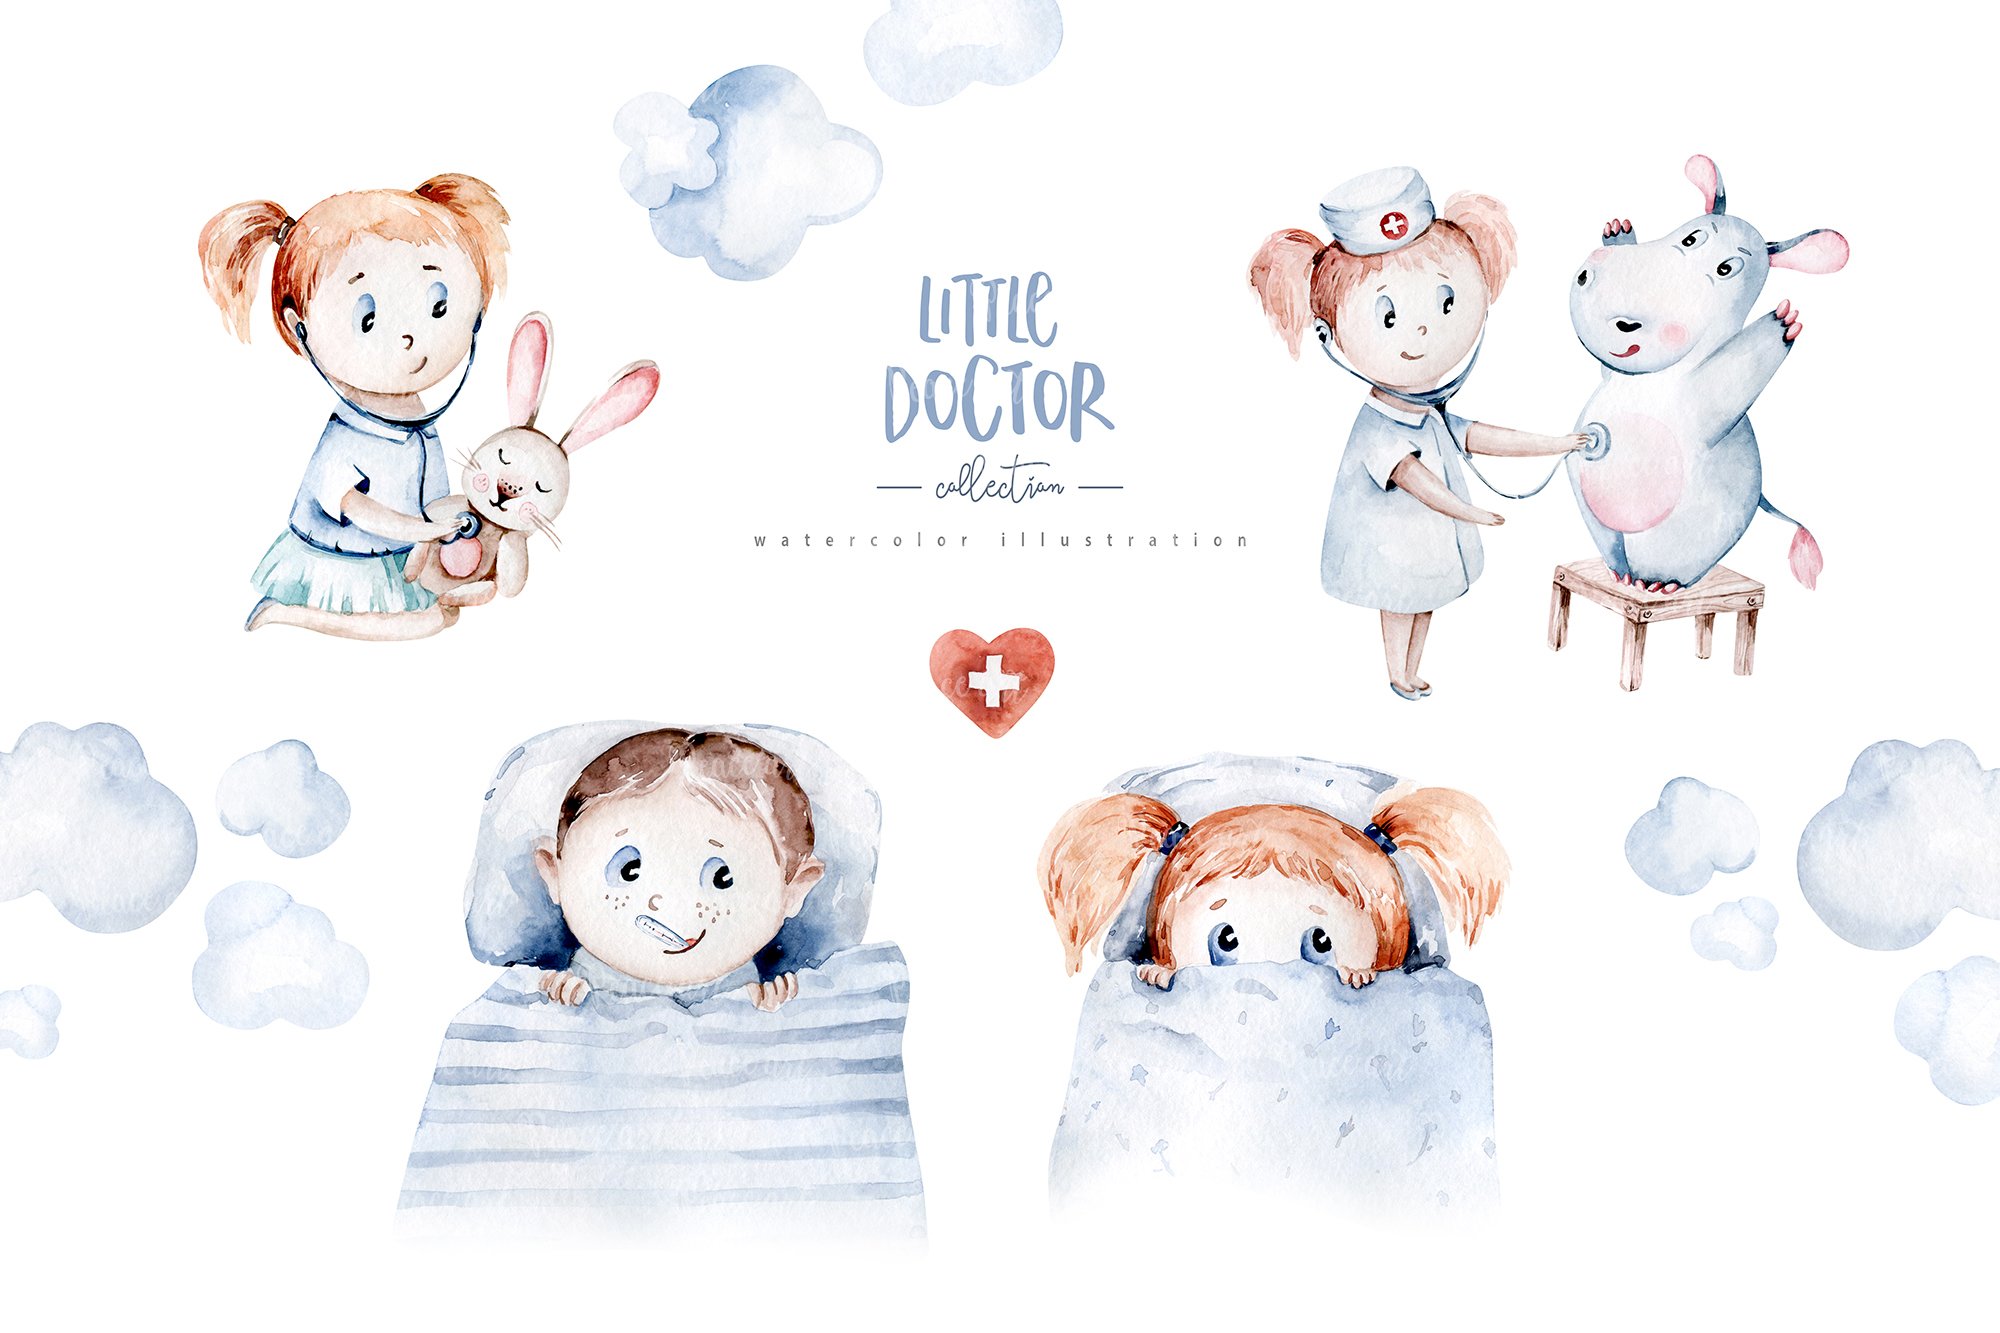 Little doctor cute collection preview image.